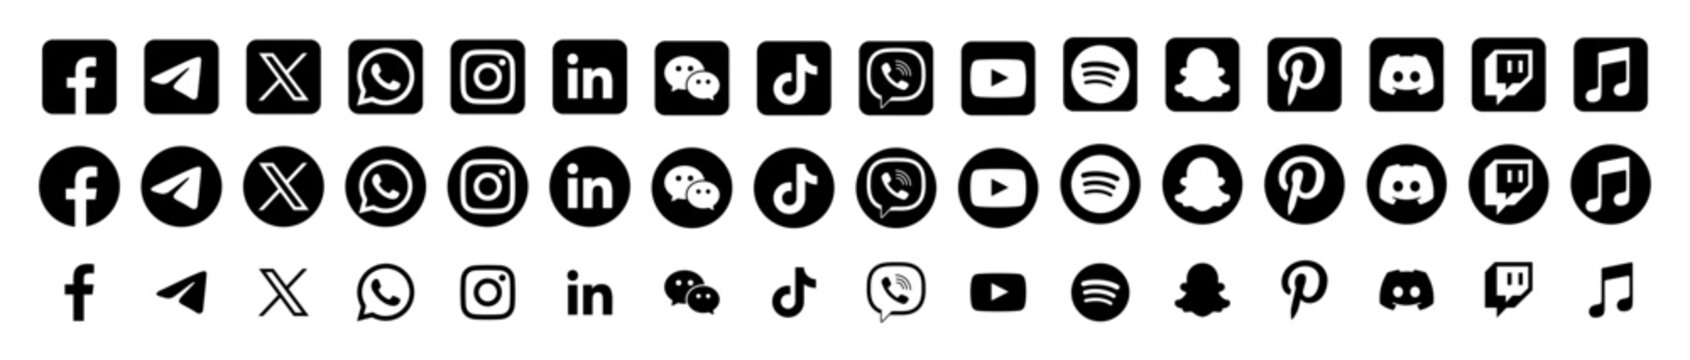 Set of Social media icon:Twitter x,Facebook,Instagram, Threads,Snapchat, Youtube,Whatsapp, Telegram. Contact and Communication Icons.Set of Web icon.Vector Editorial